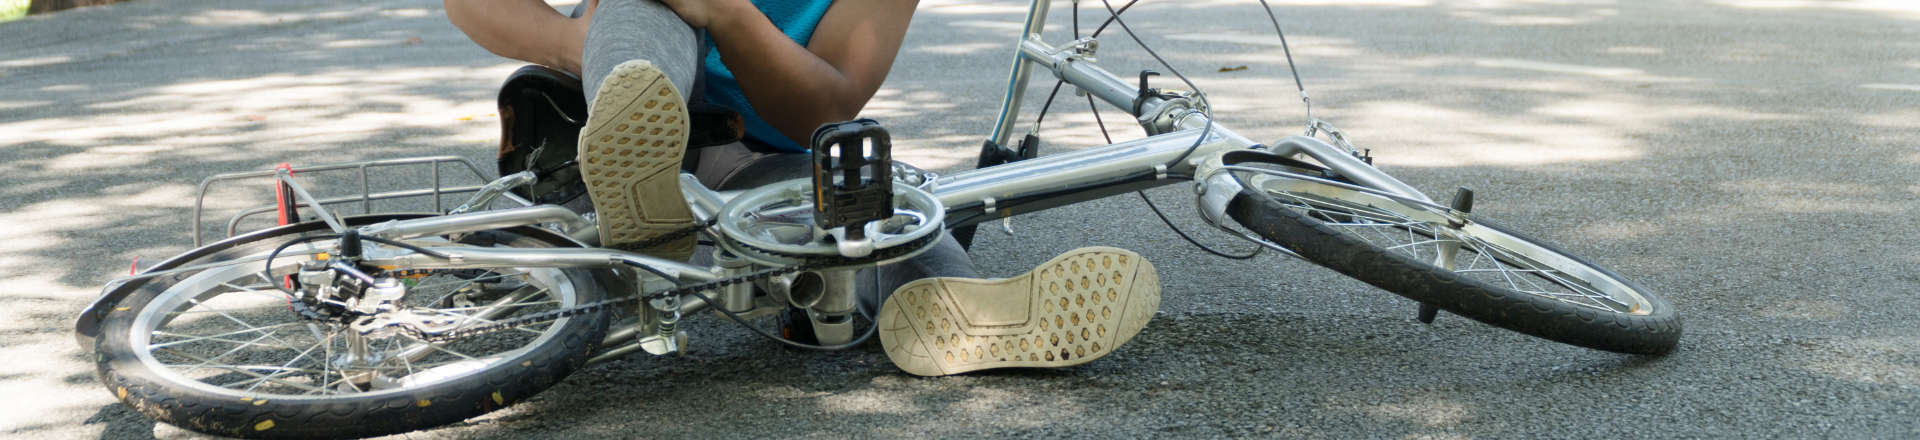 an injured cyclist sitting on the road next to their bike